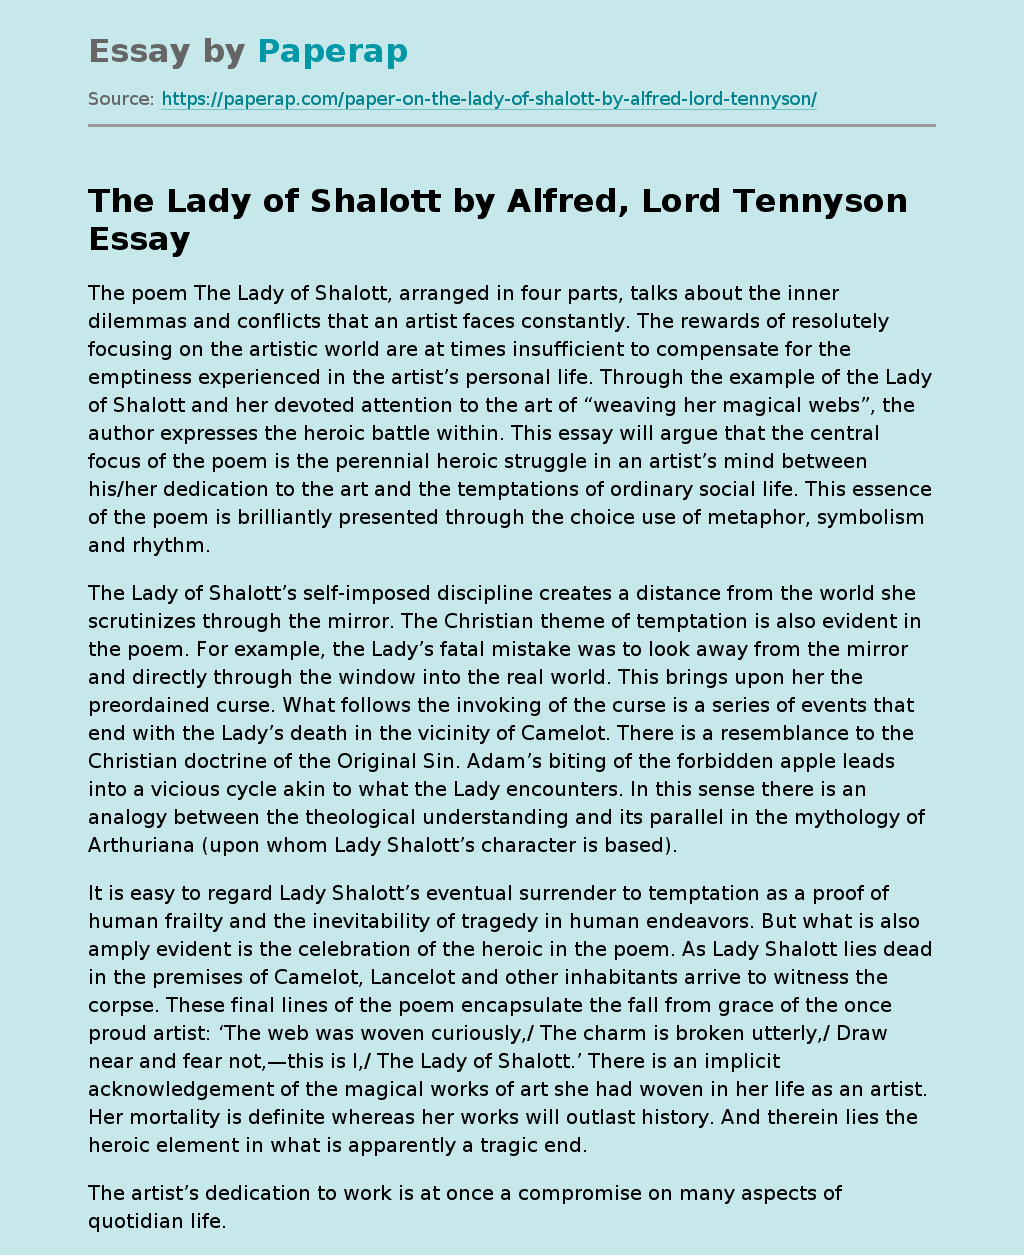 The Lady of Shalott by Alfred, Lord Tennyson